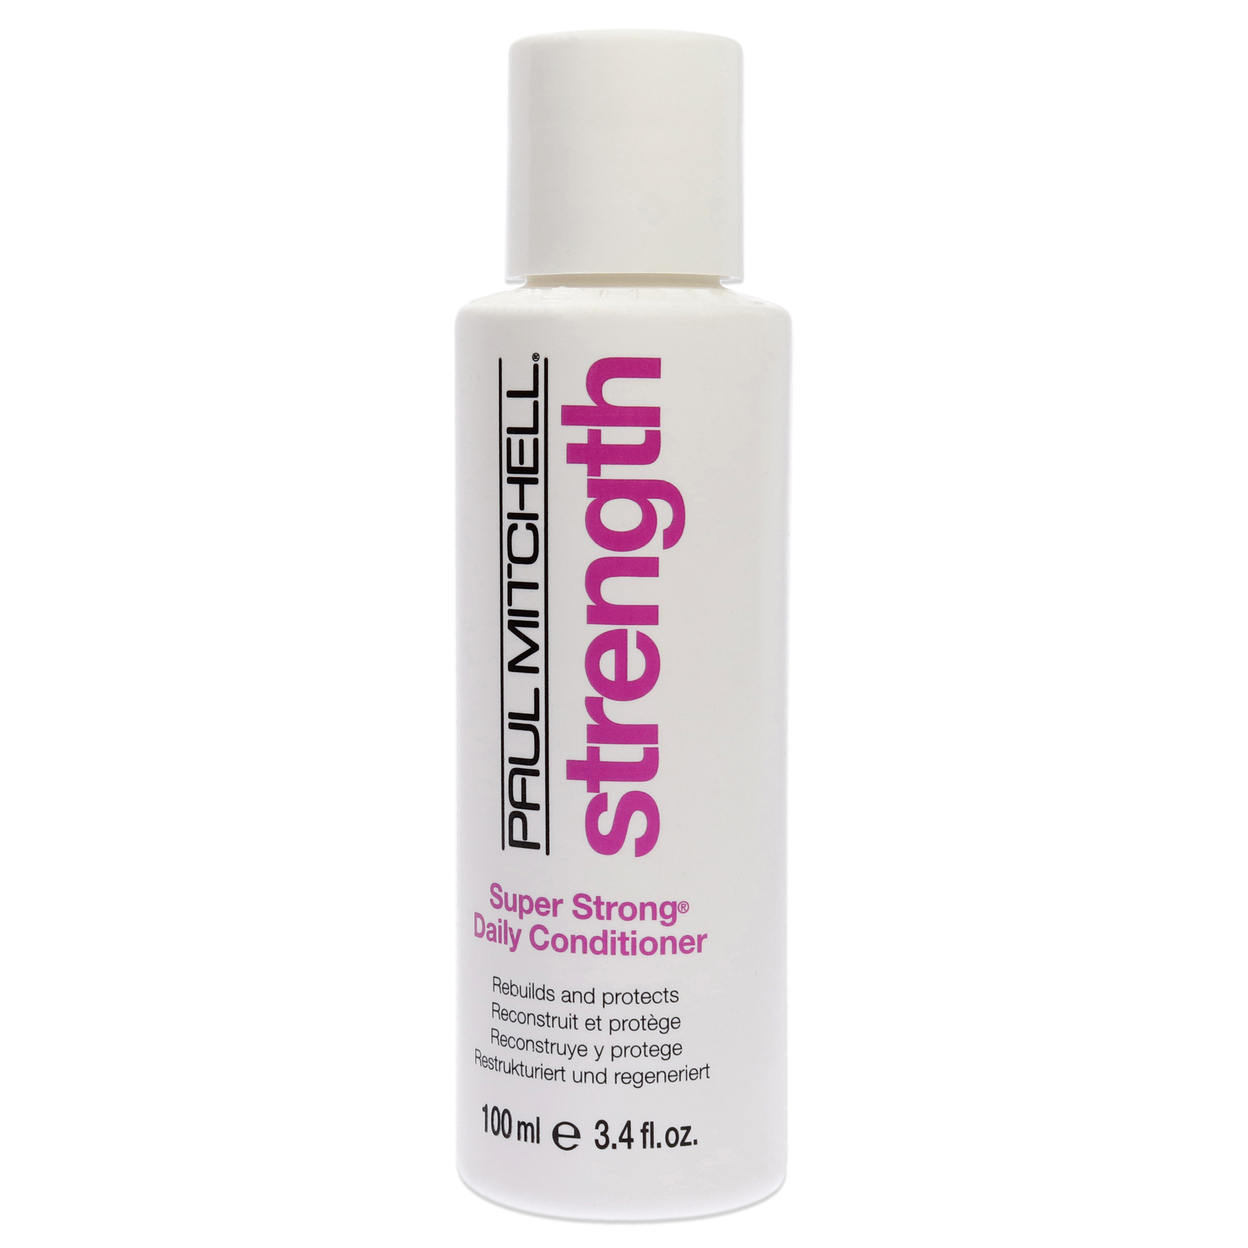 Paul Mitchell Super Strong Daily Conditioner 3.4 Oz